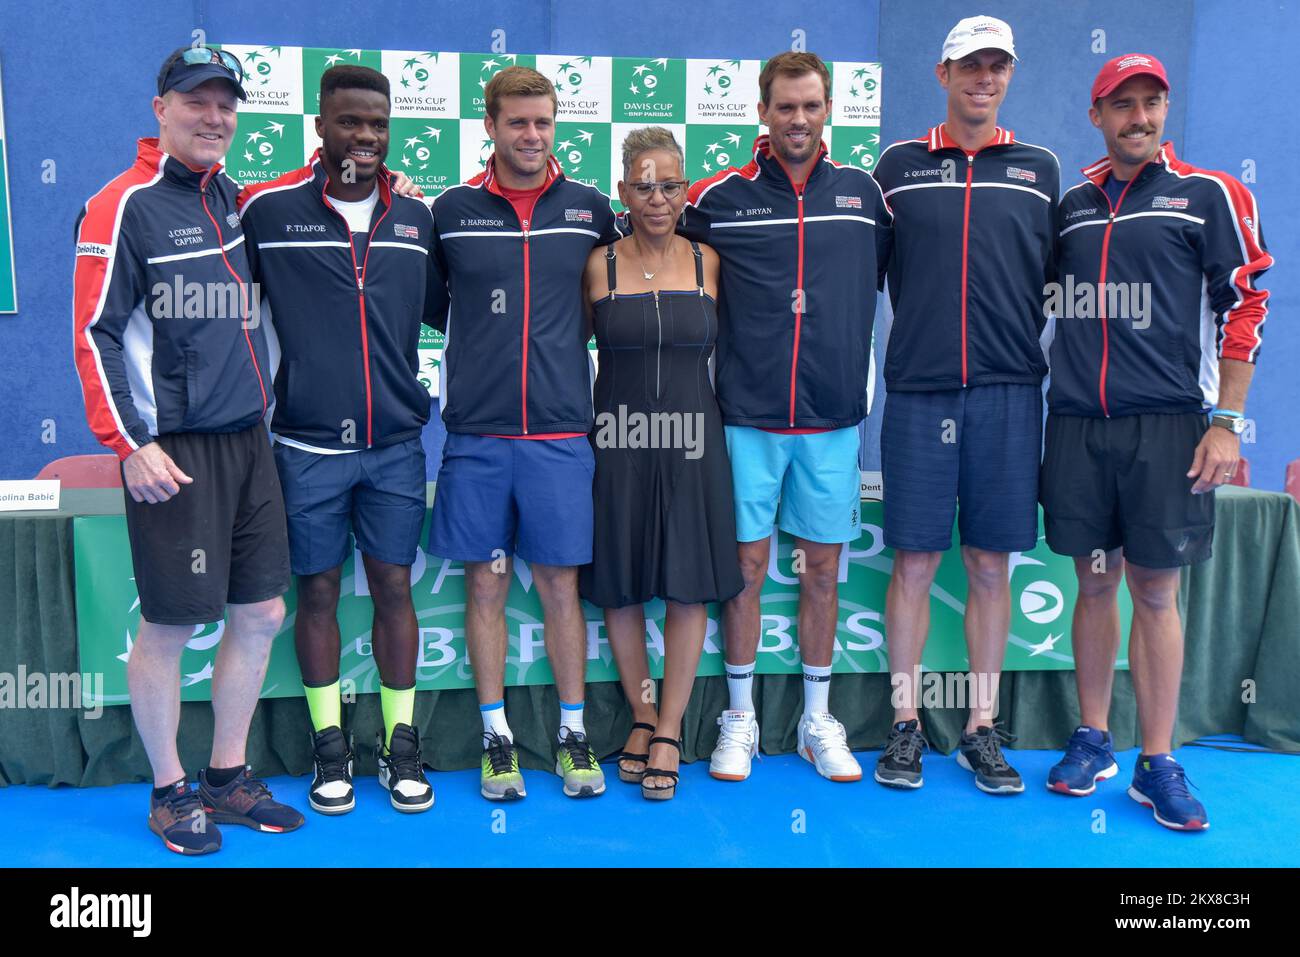 13.09.2018., Zadar, Croatia - The draw for the Davis Cup semi-final between Croatia and the USA. The two teams will battle it out at Sportski centar Visnjik from 14-16 September 2018 in Zadar for a place in the Davis Cup final.Team USA: Jim Courier, Frances Tiafoe, Mike Bryan, Ryan Harrison, Steve Johnson, Katrina Adams Photo: Dino Stanin/PIXSELL Stock Photo